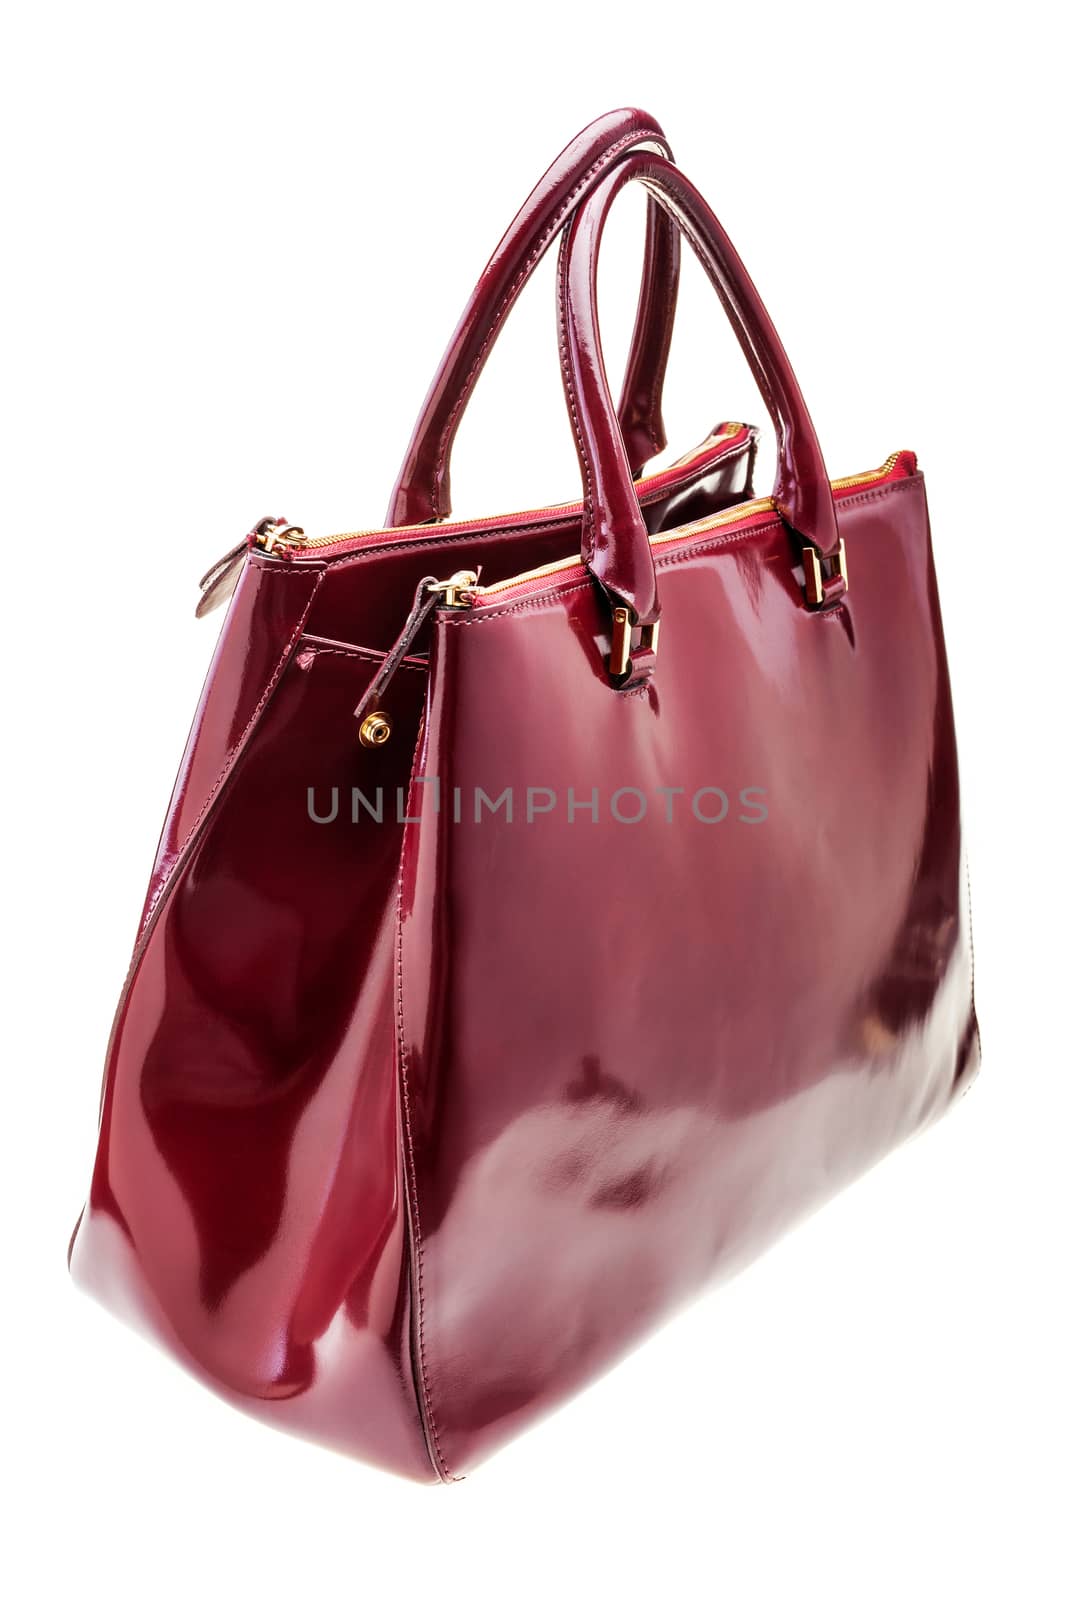 New dark red womens bag isolated on white background.